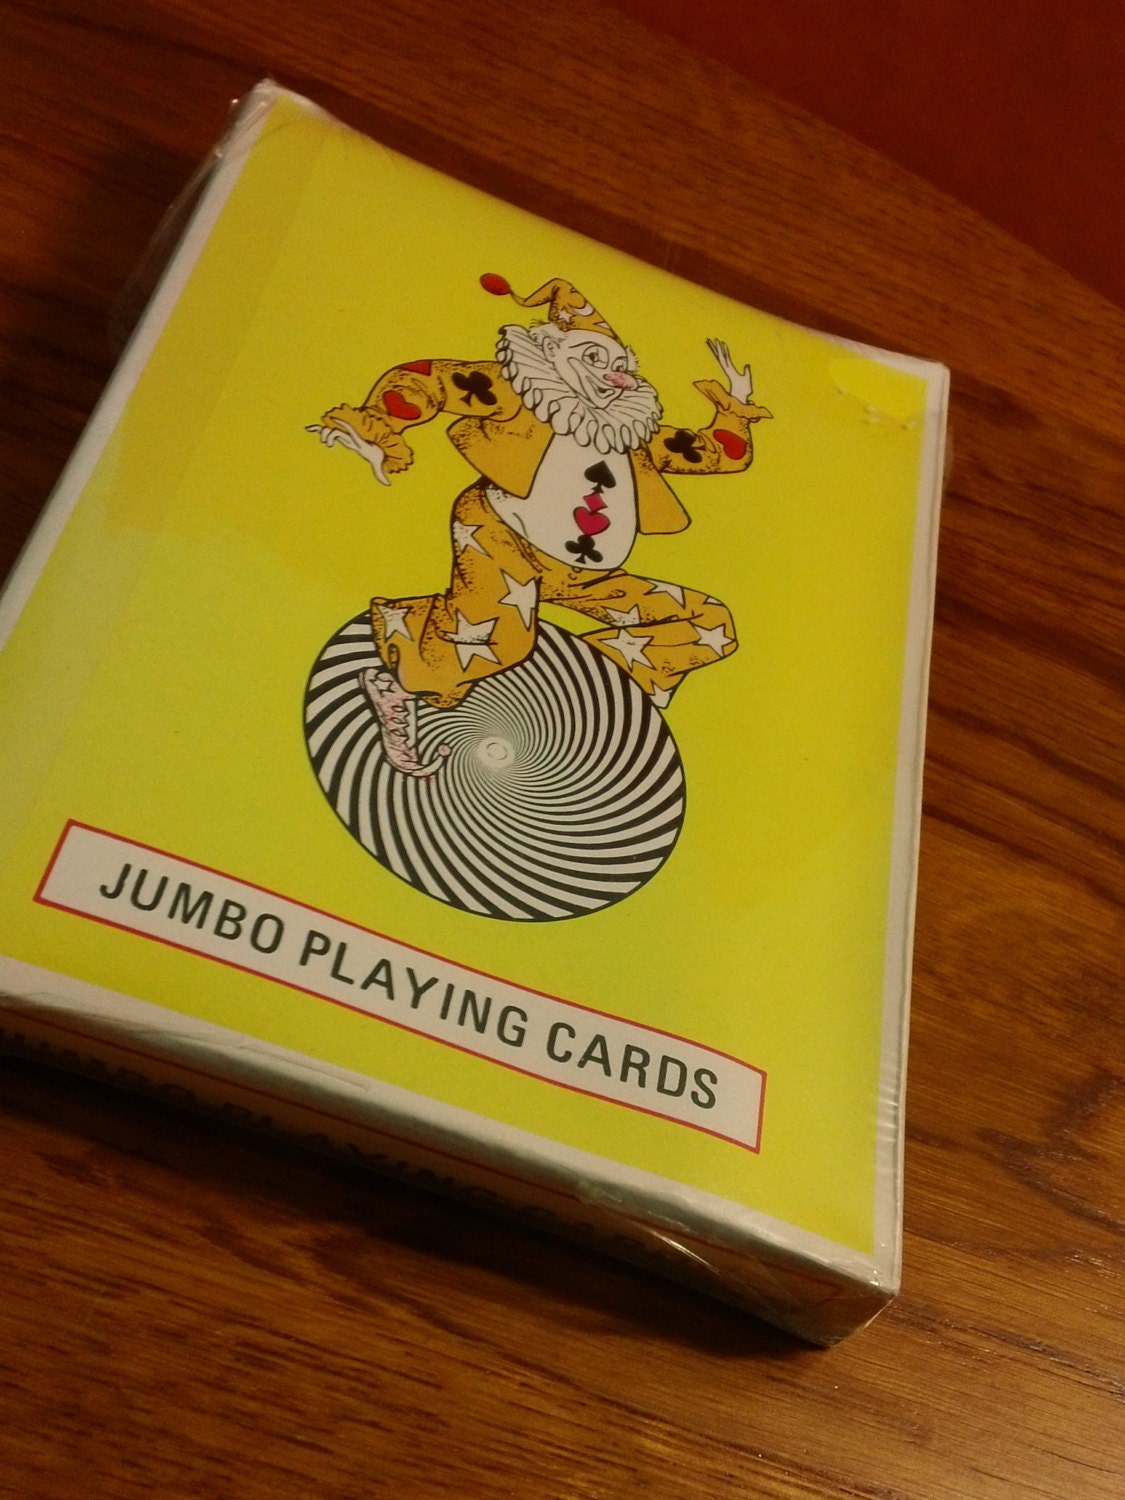 Vintage Jumbo Playing Cards with Clown on spinning Wheel still